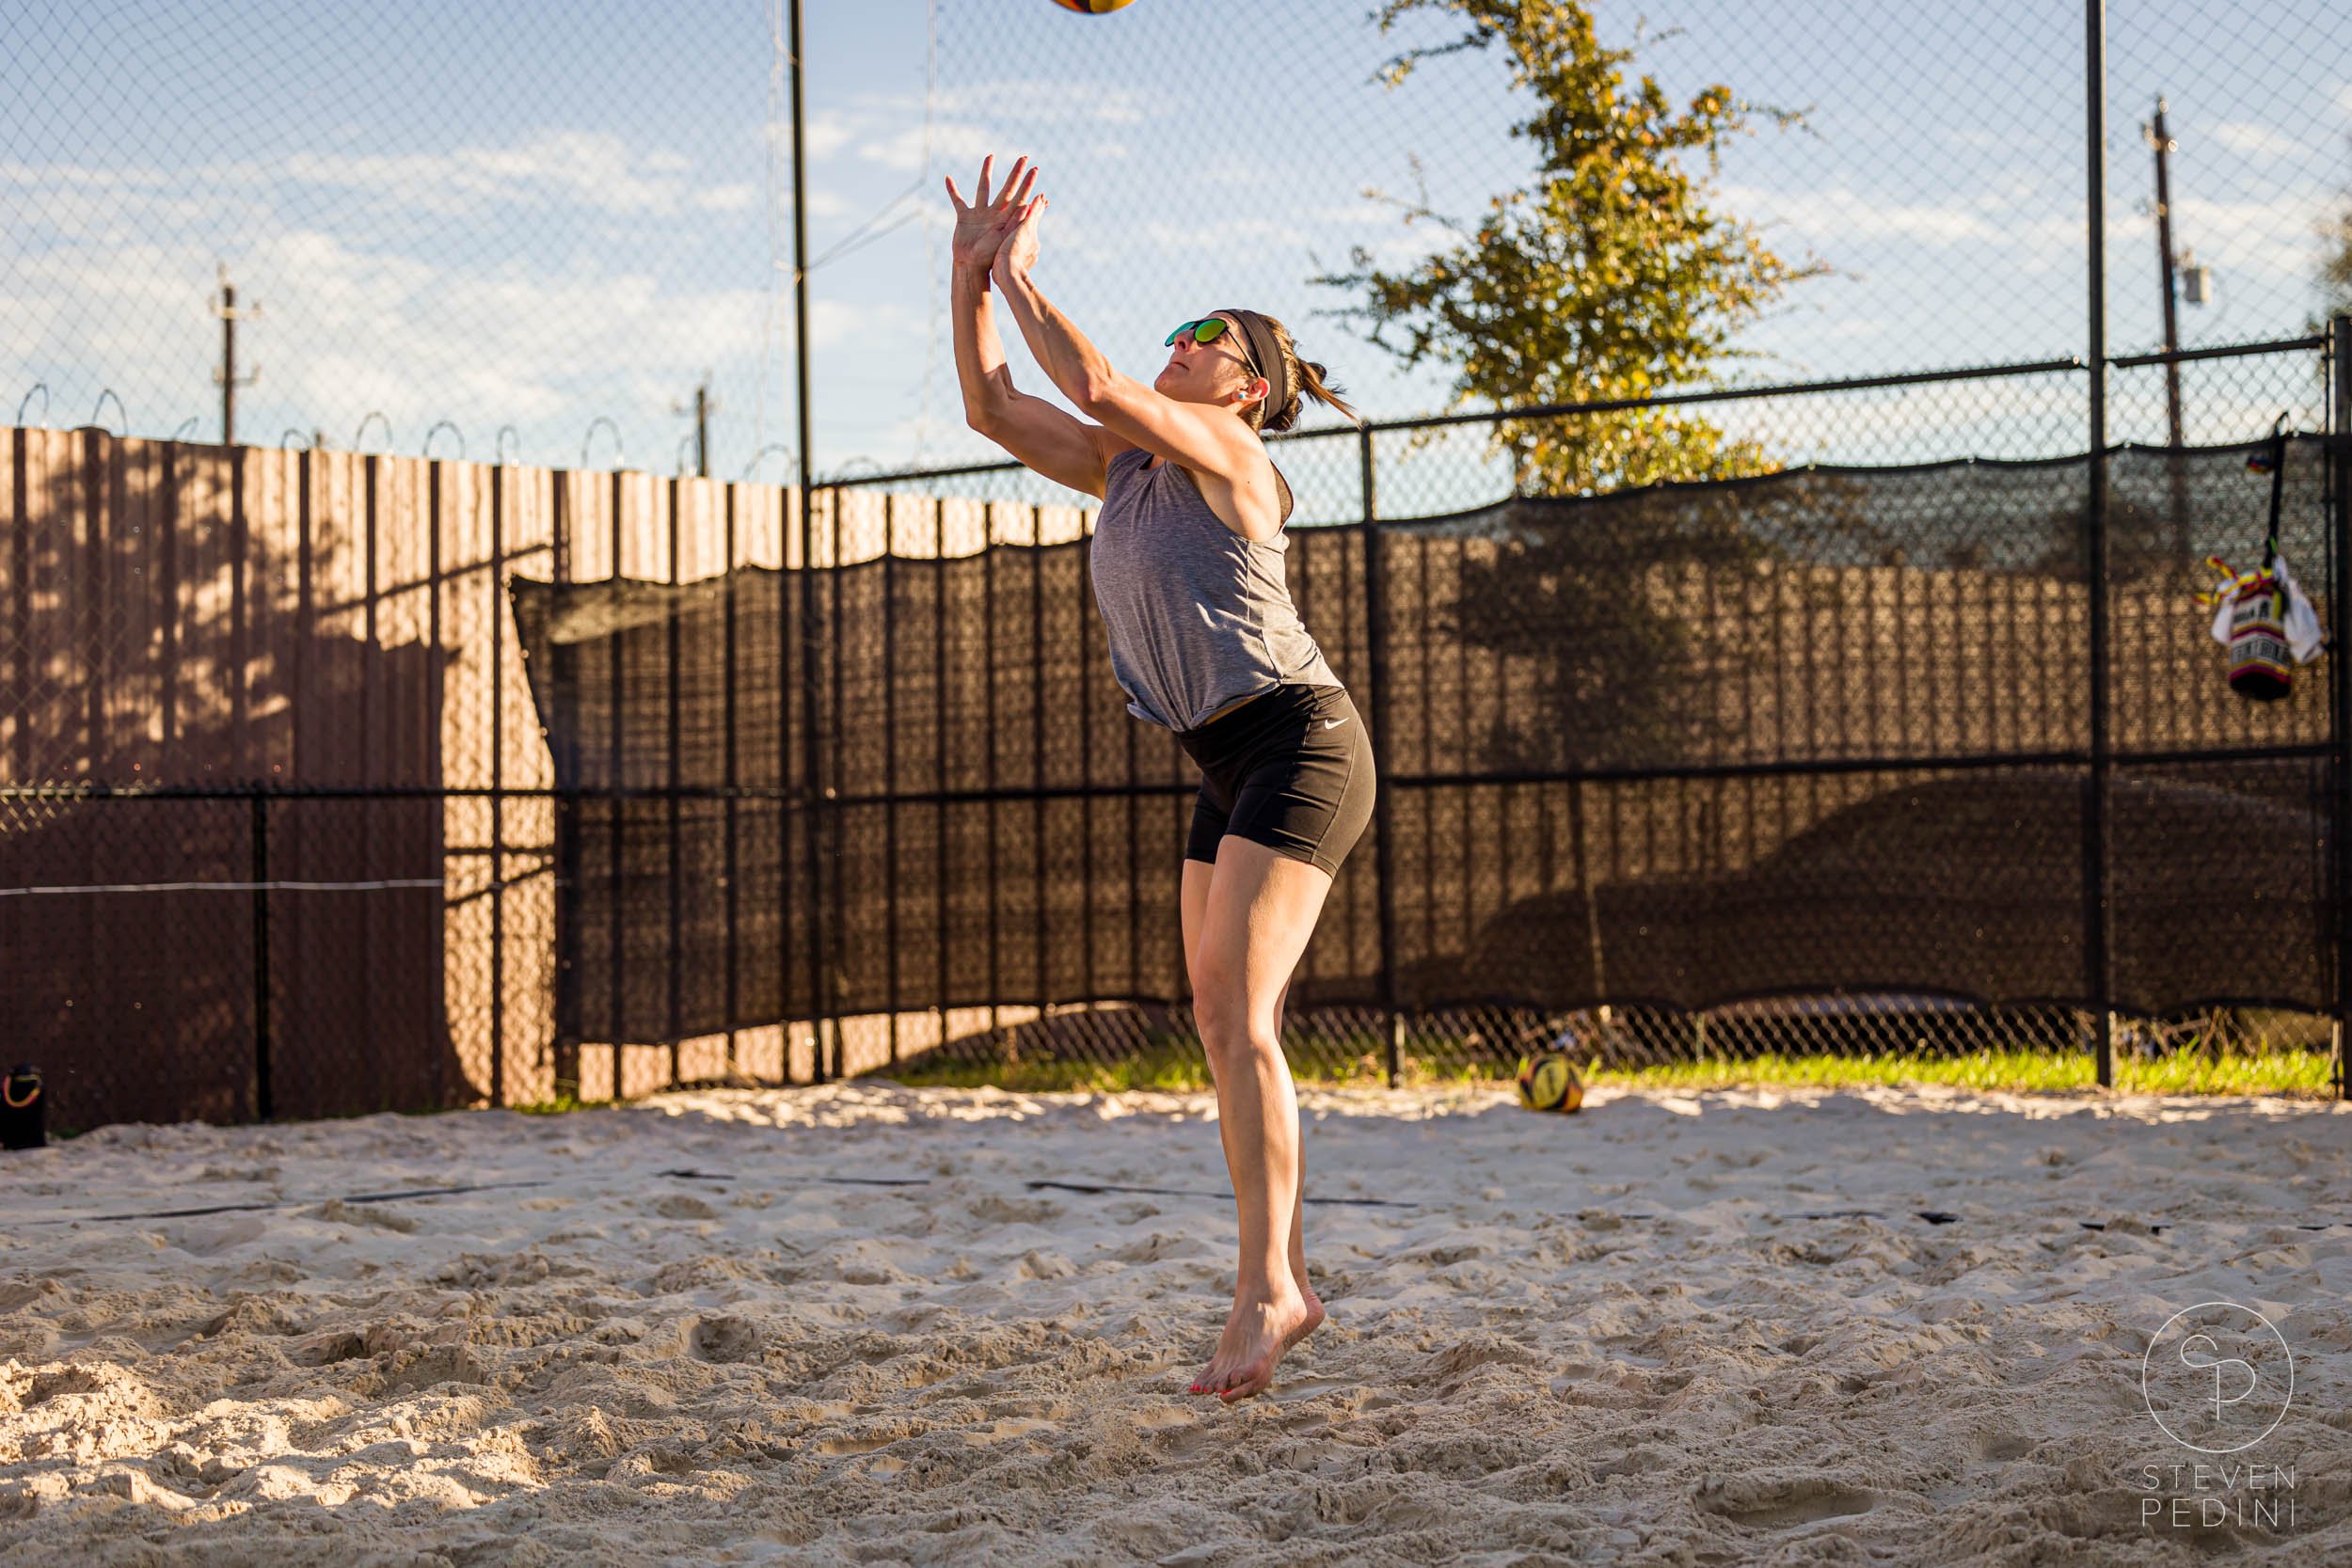 Steven Pedini Photography - Bumpy Pickle - Sand Volleyball - Houston TX - World Cup of Volleyball - 00116.jpg